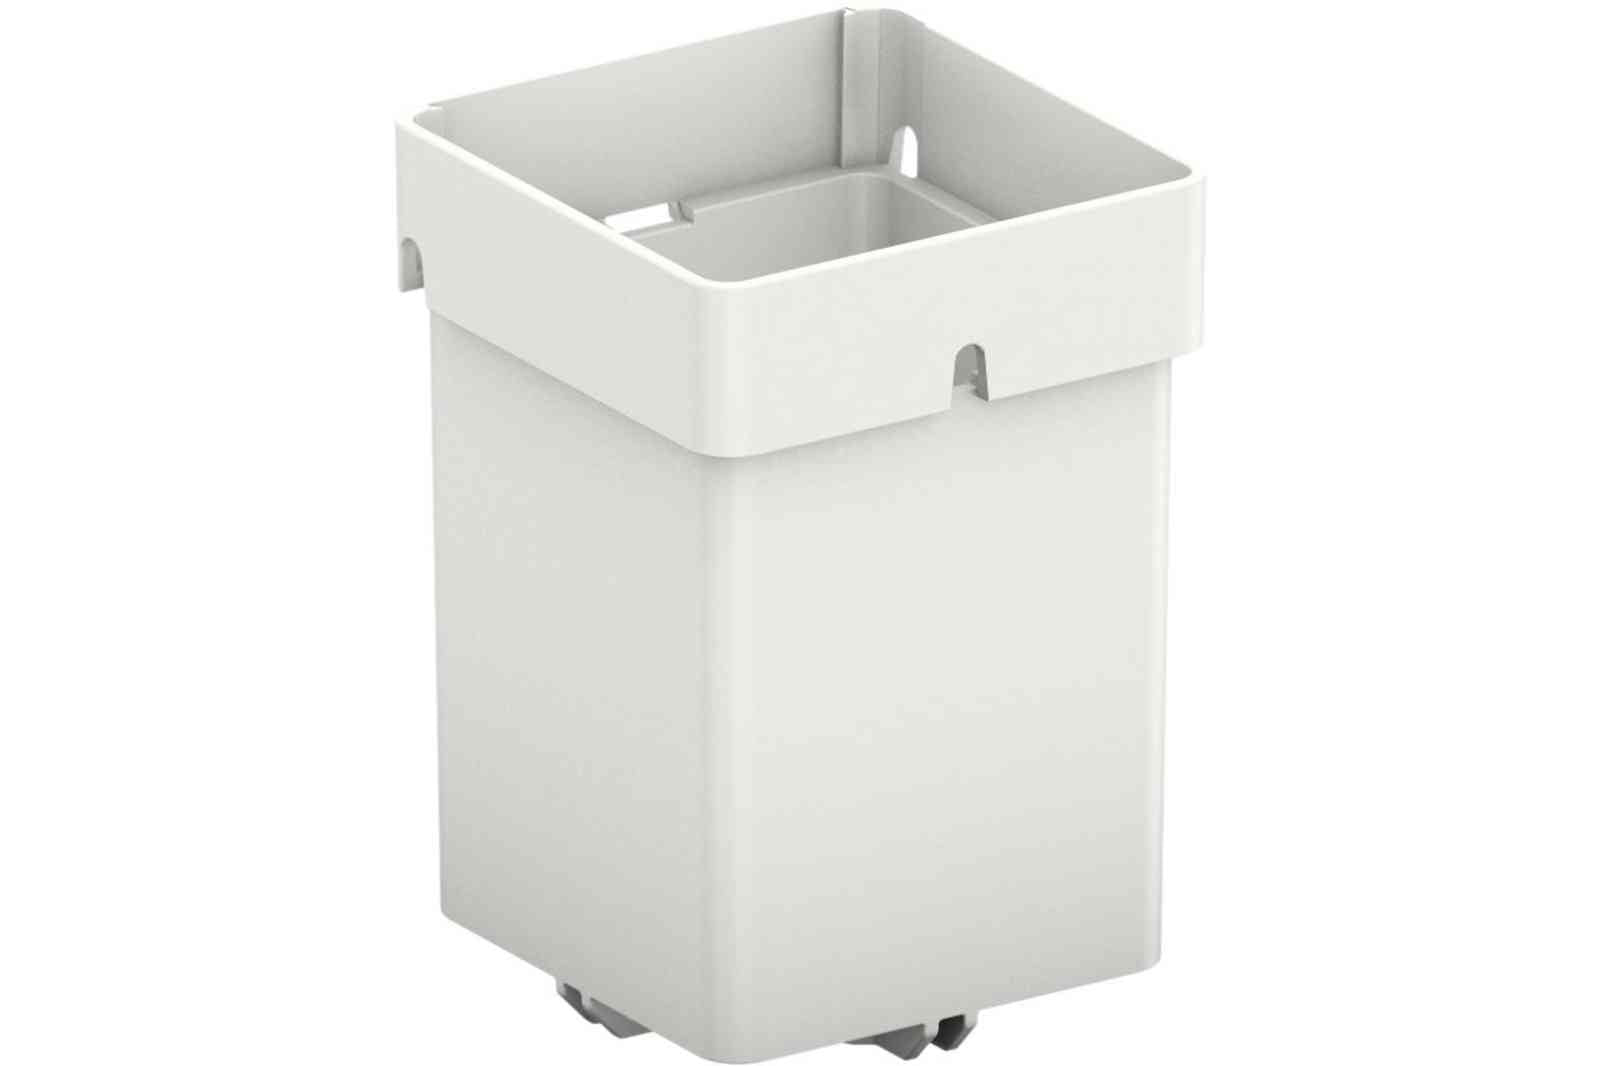 Festool 204858 Container Box 50x50x68 10-pack, SysGen3 Organizer